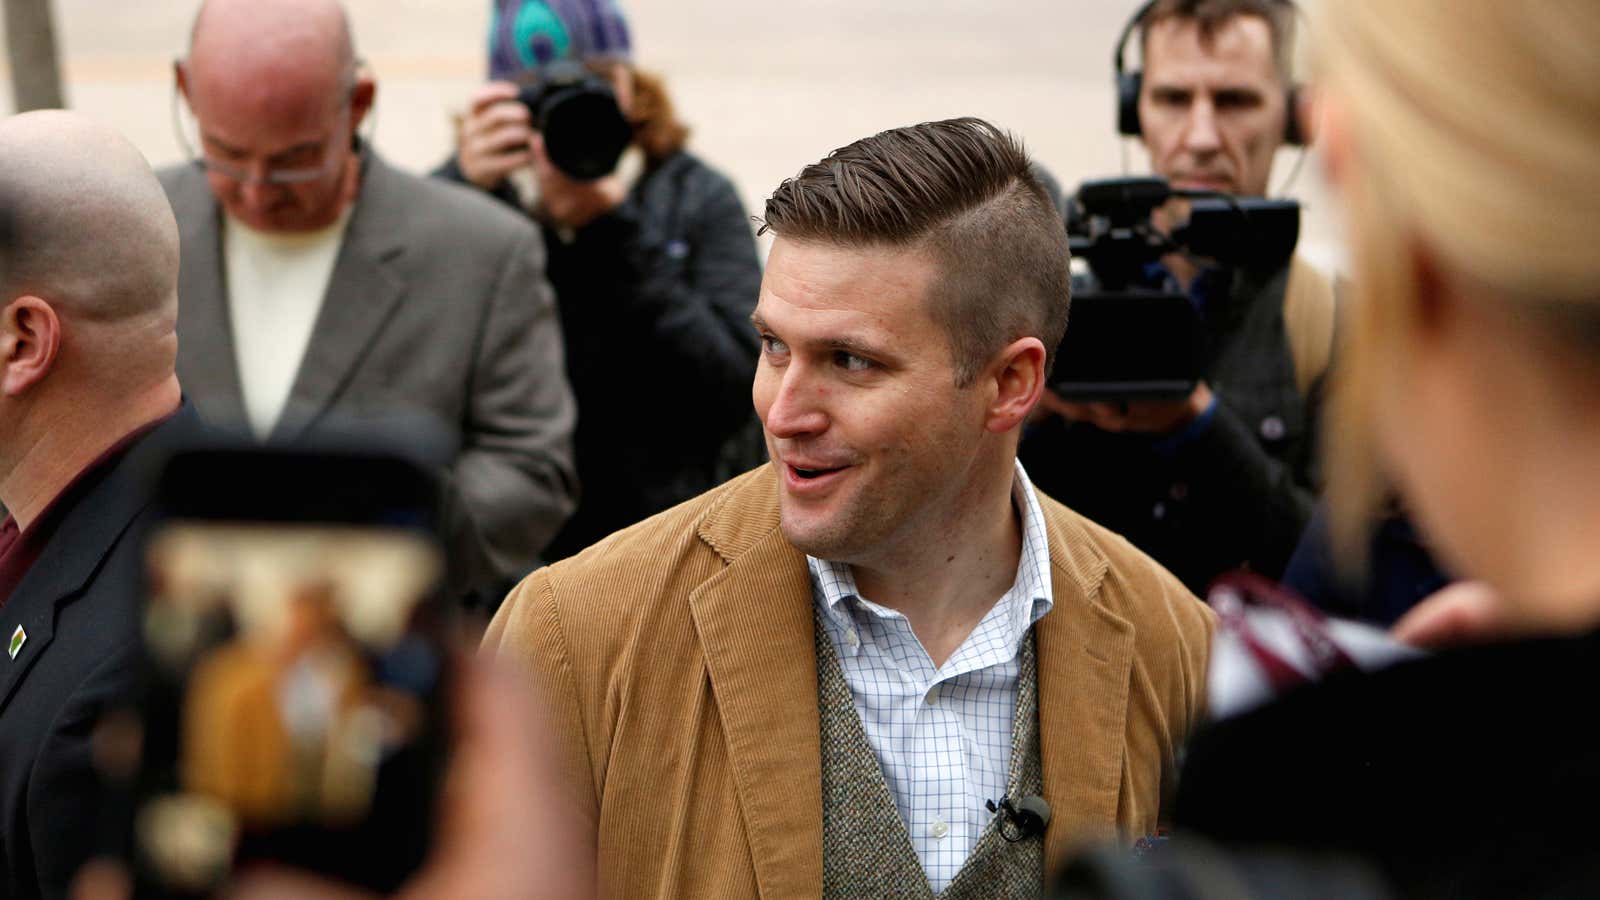 White nationalist Richard Spencer speaks with college students in Texas.